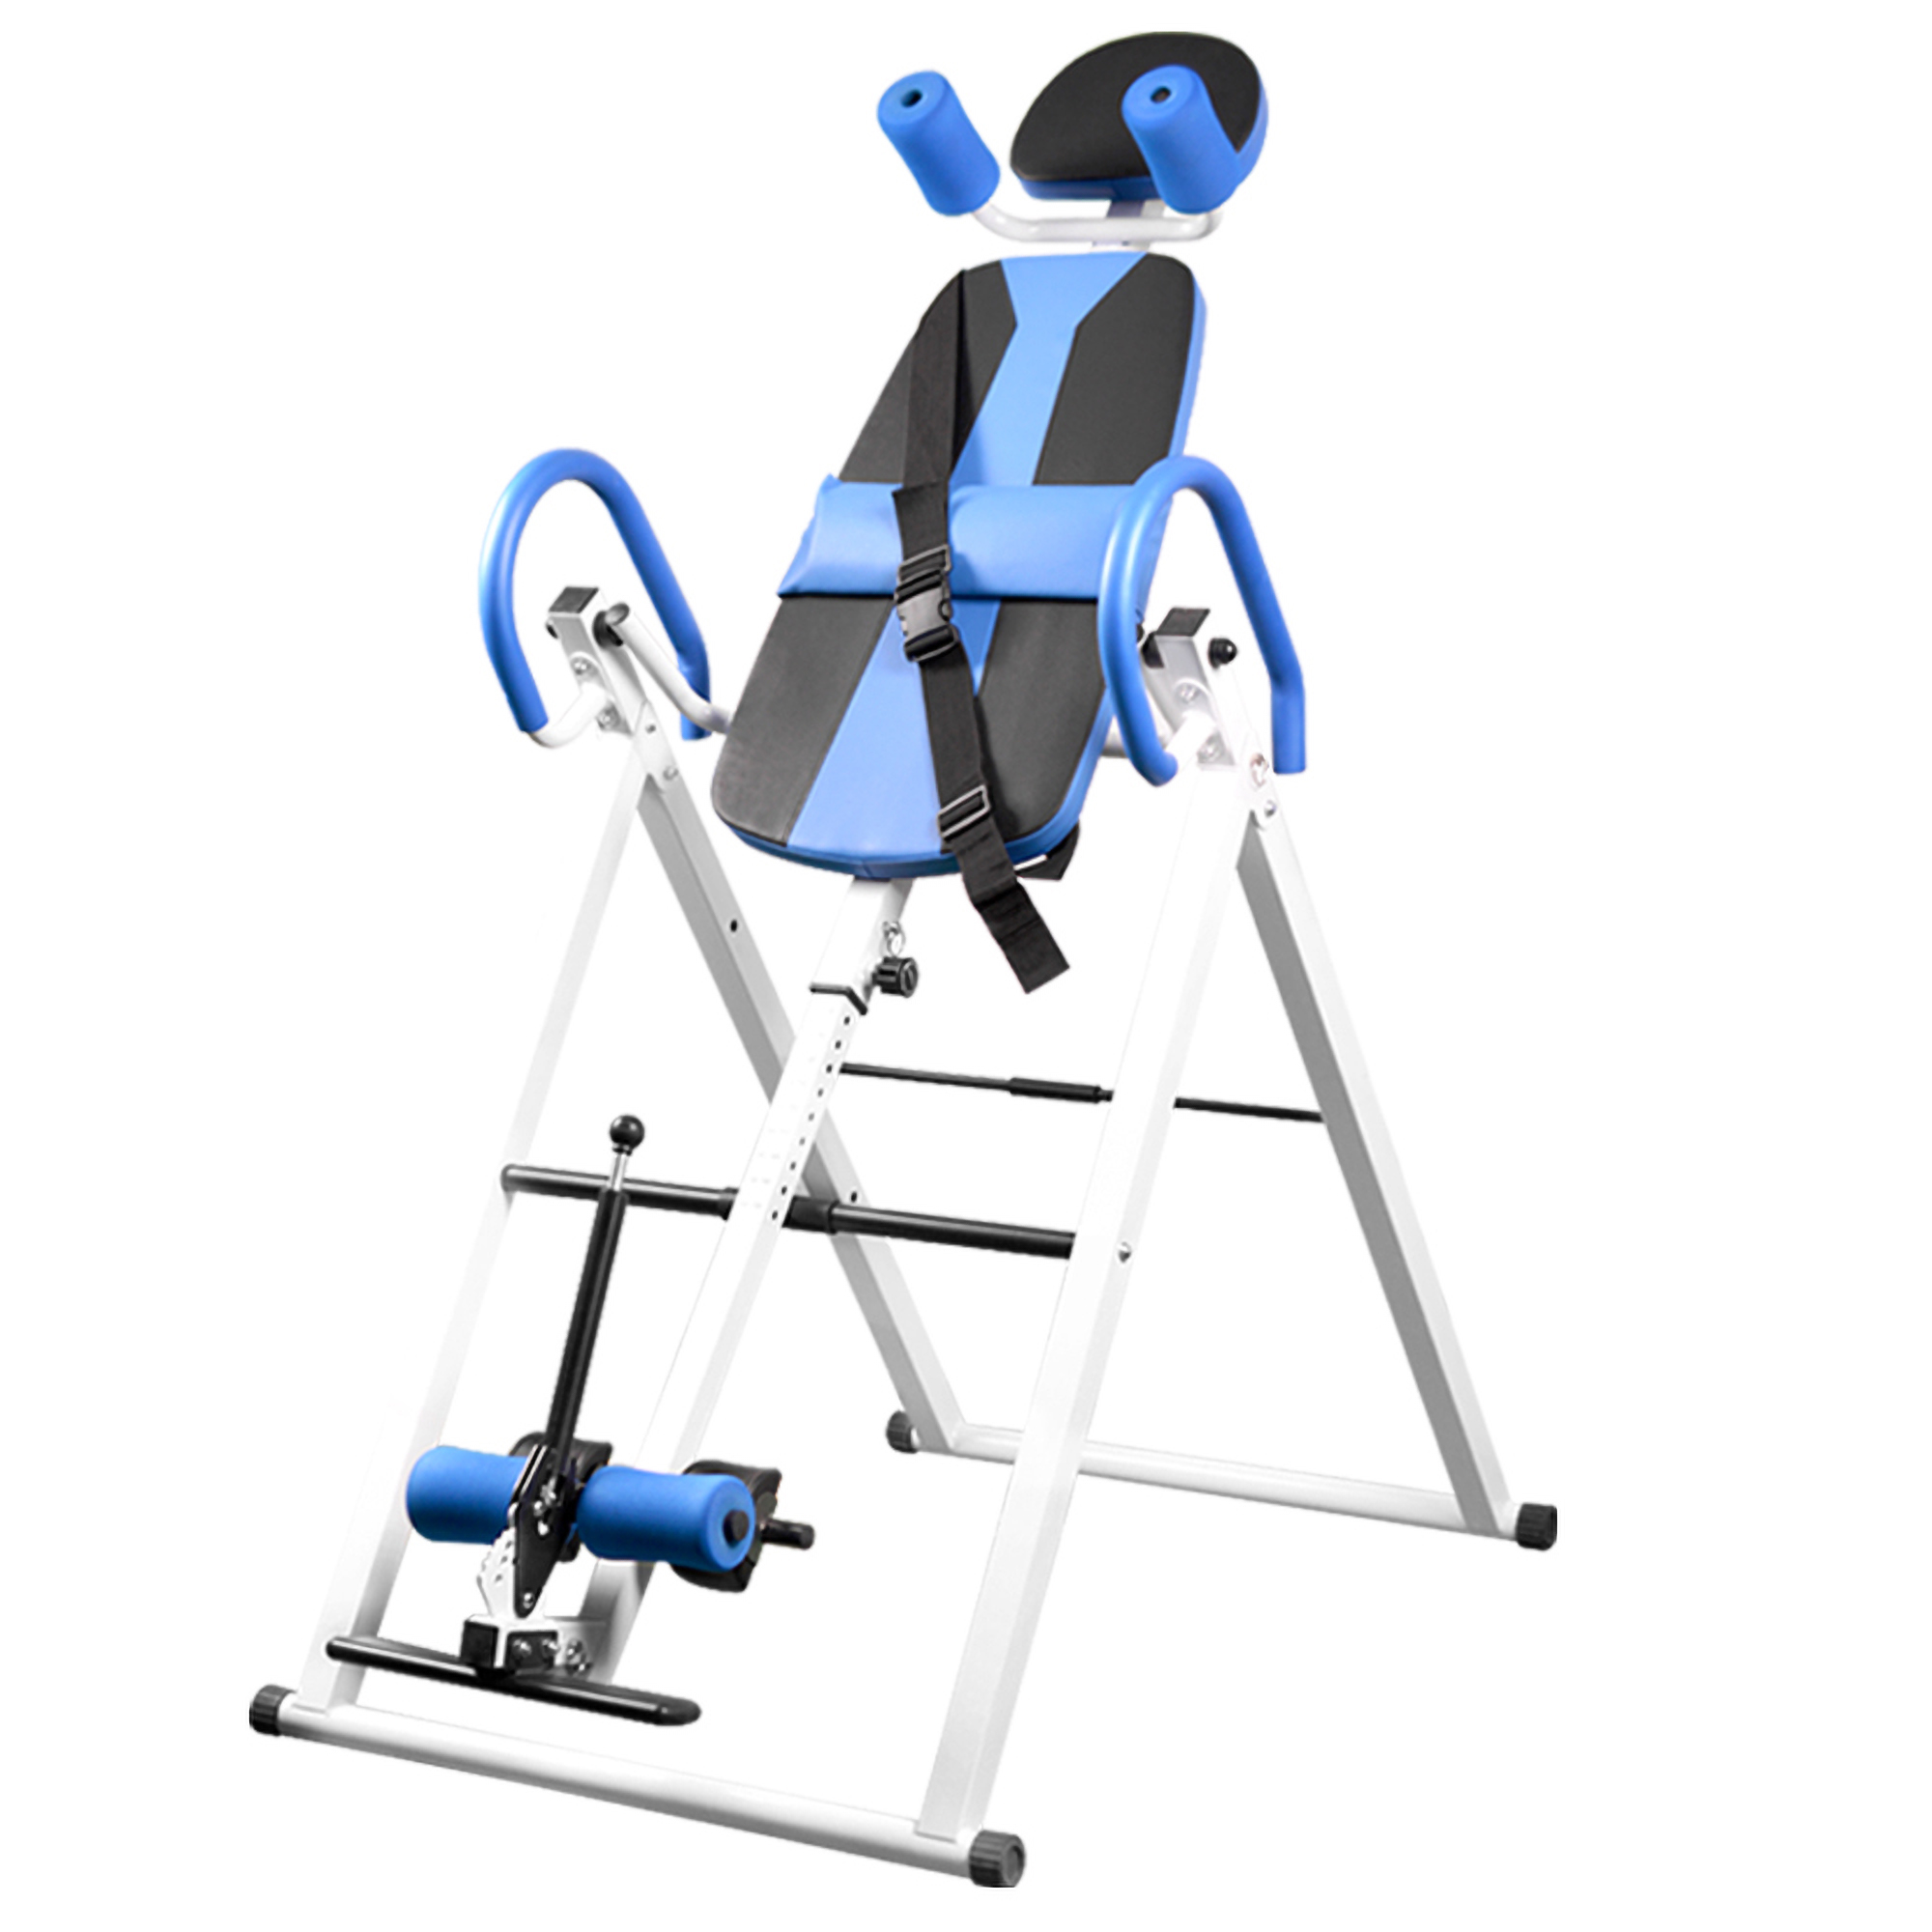 Ironman Gravity 2000 Inversion Table - image 1 of 7